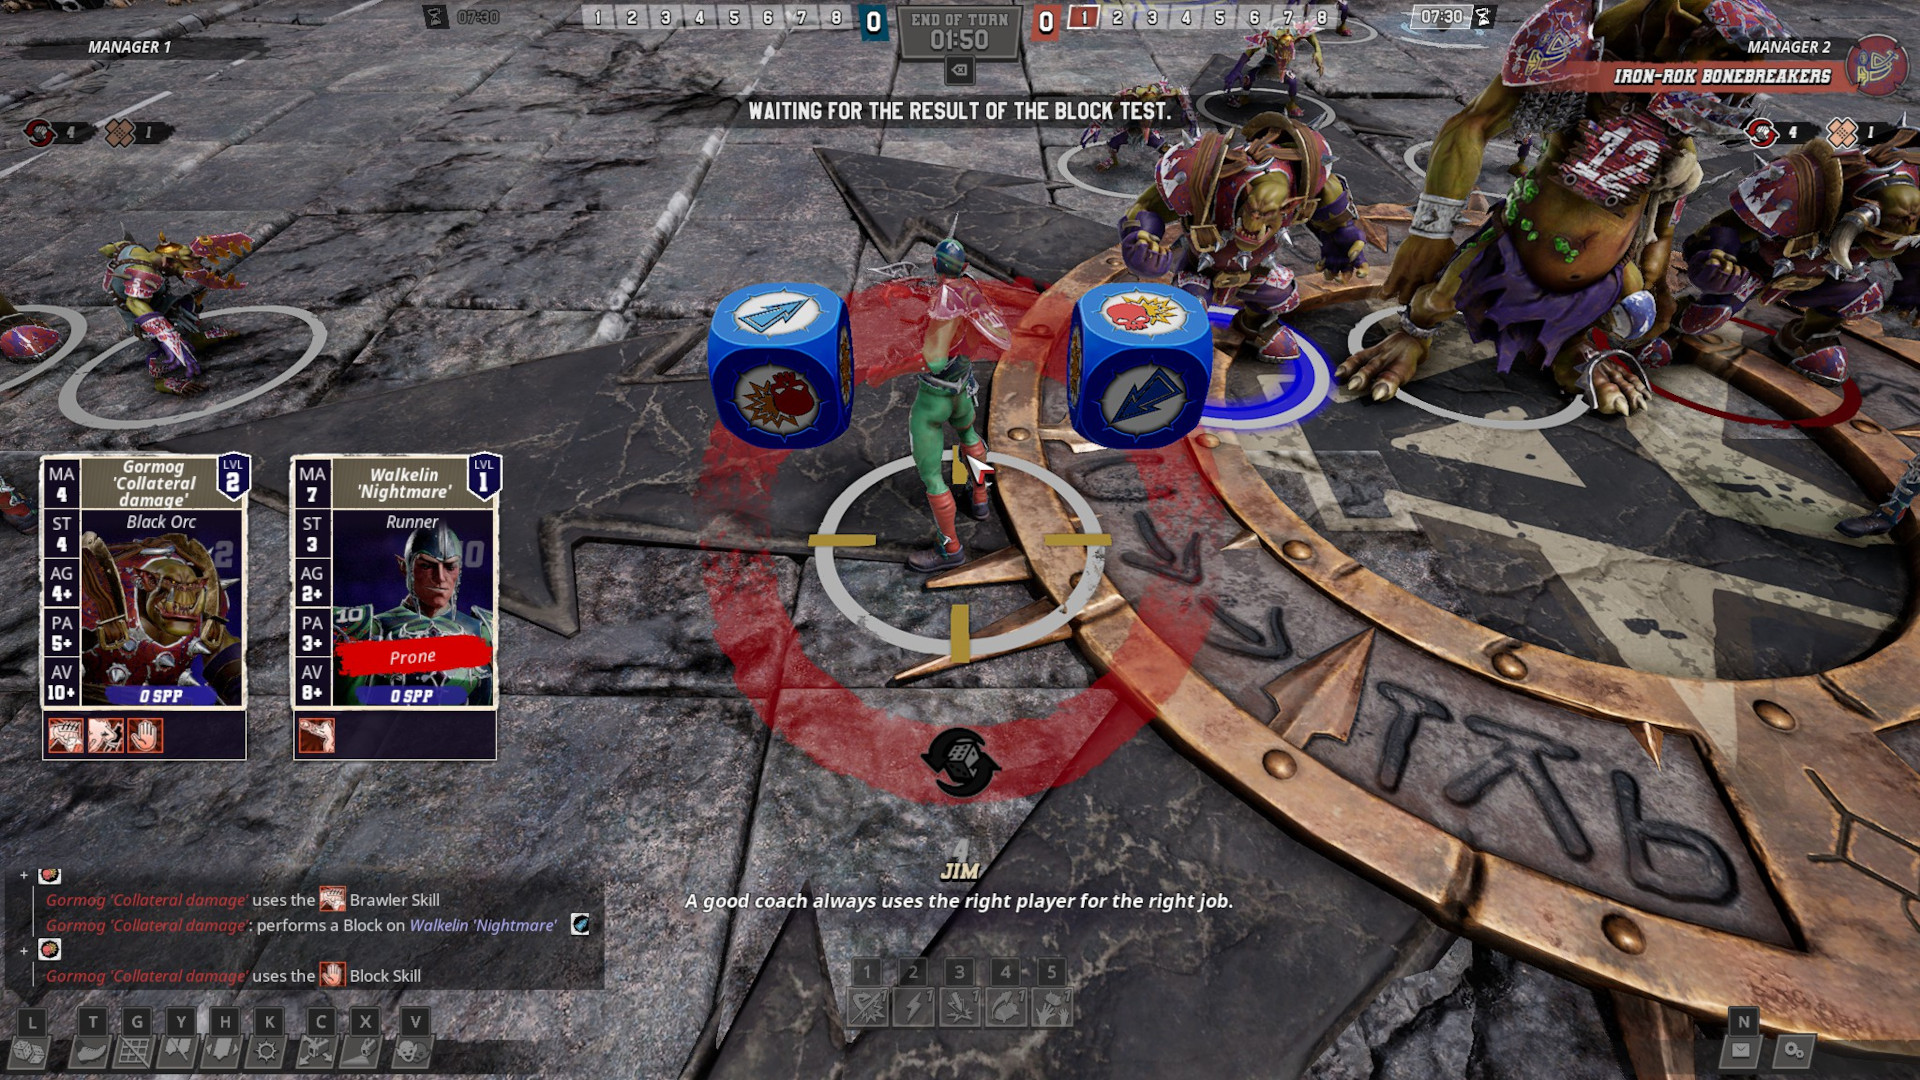 Blood Bowl 3 online bugs - screenshot of a game in progress, a block test from a Dark Elf player on an Orc